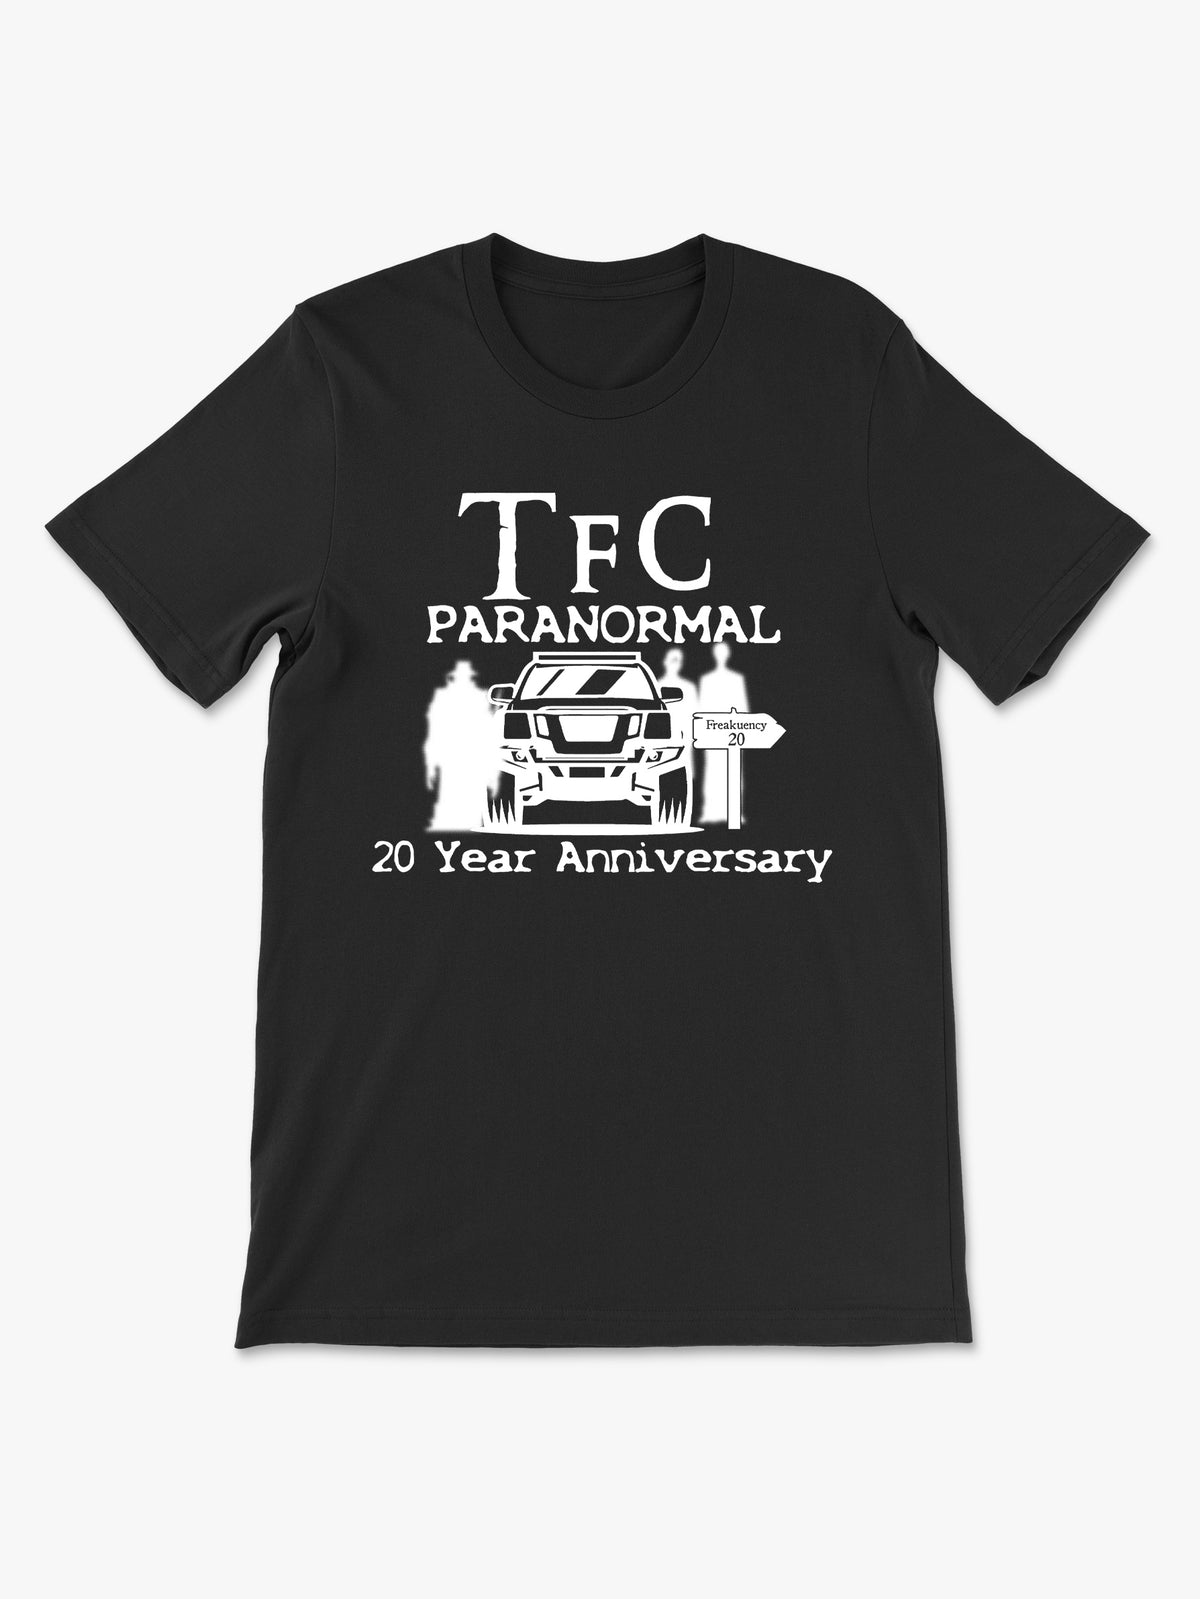 TFC Paranormal 20th Annniversary by CLU